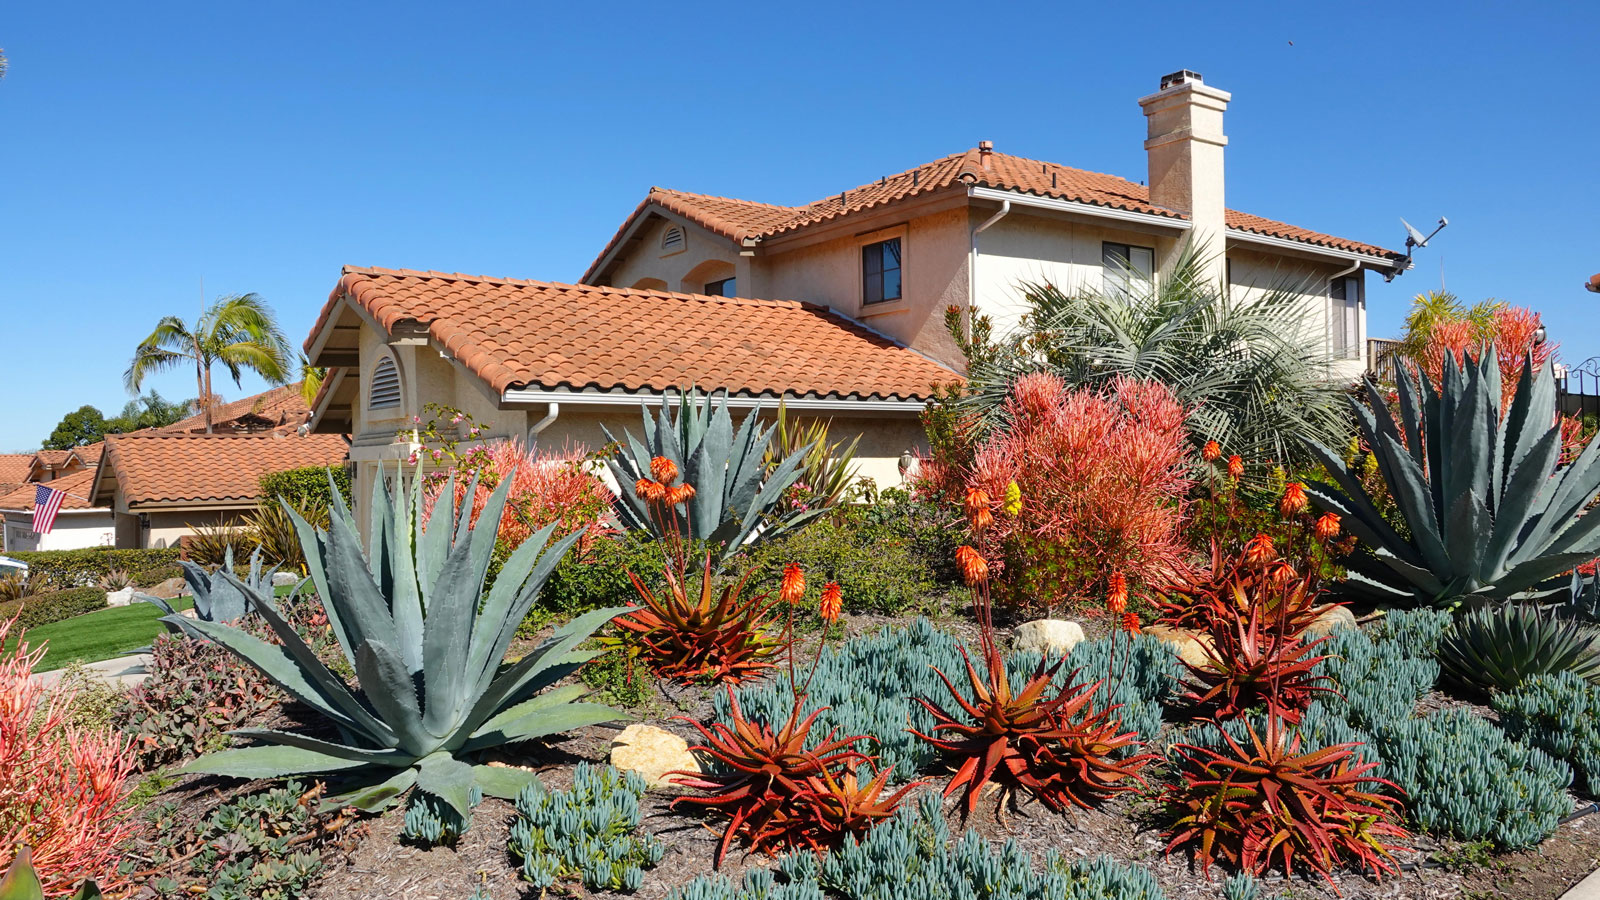 How to design a drought-tolerant yard – a 5-step plan for a space that will thrive with limited water